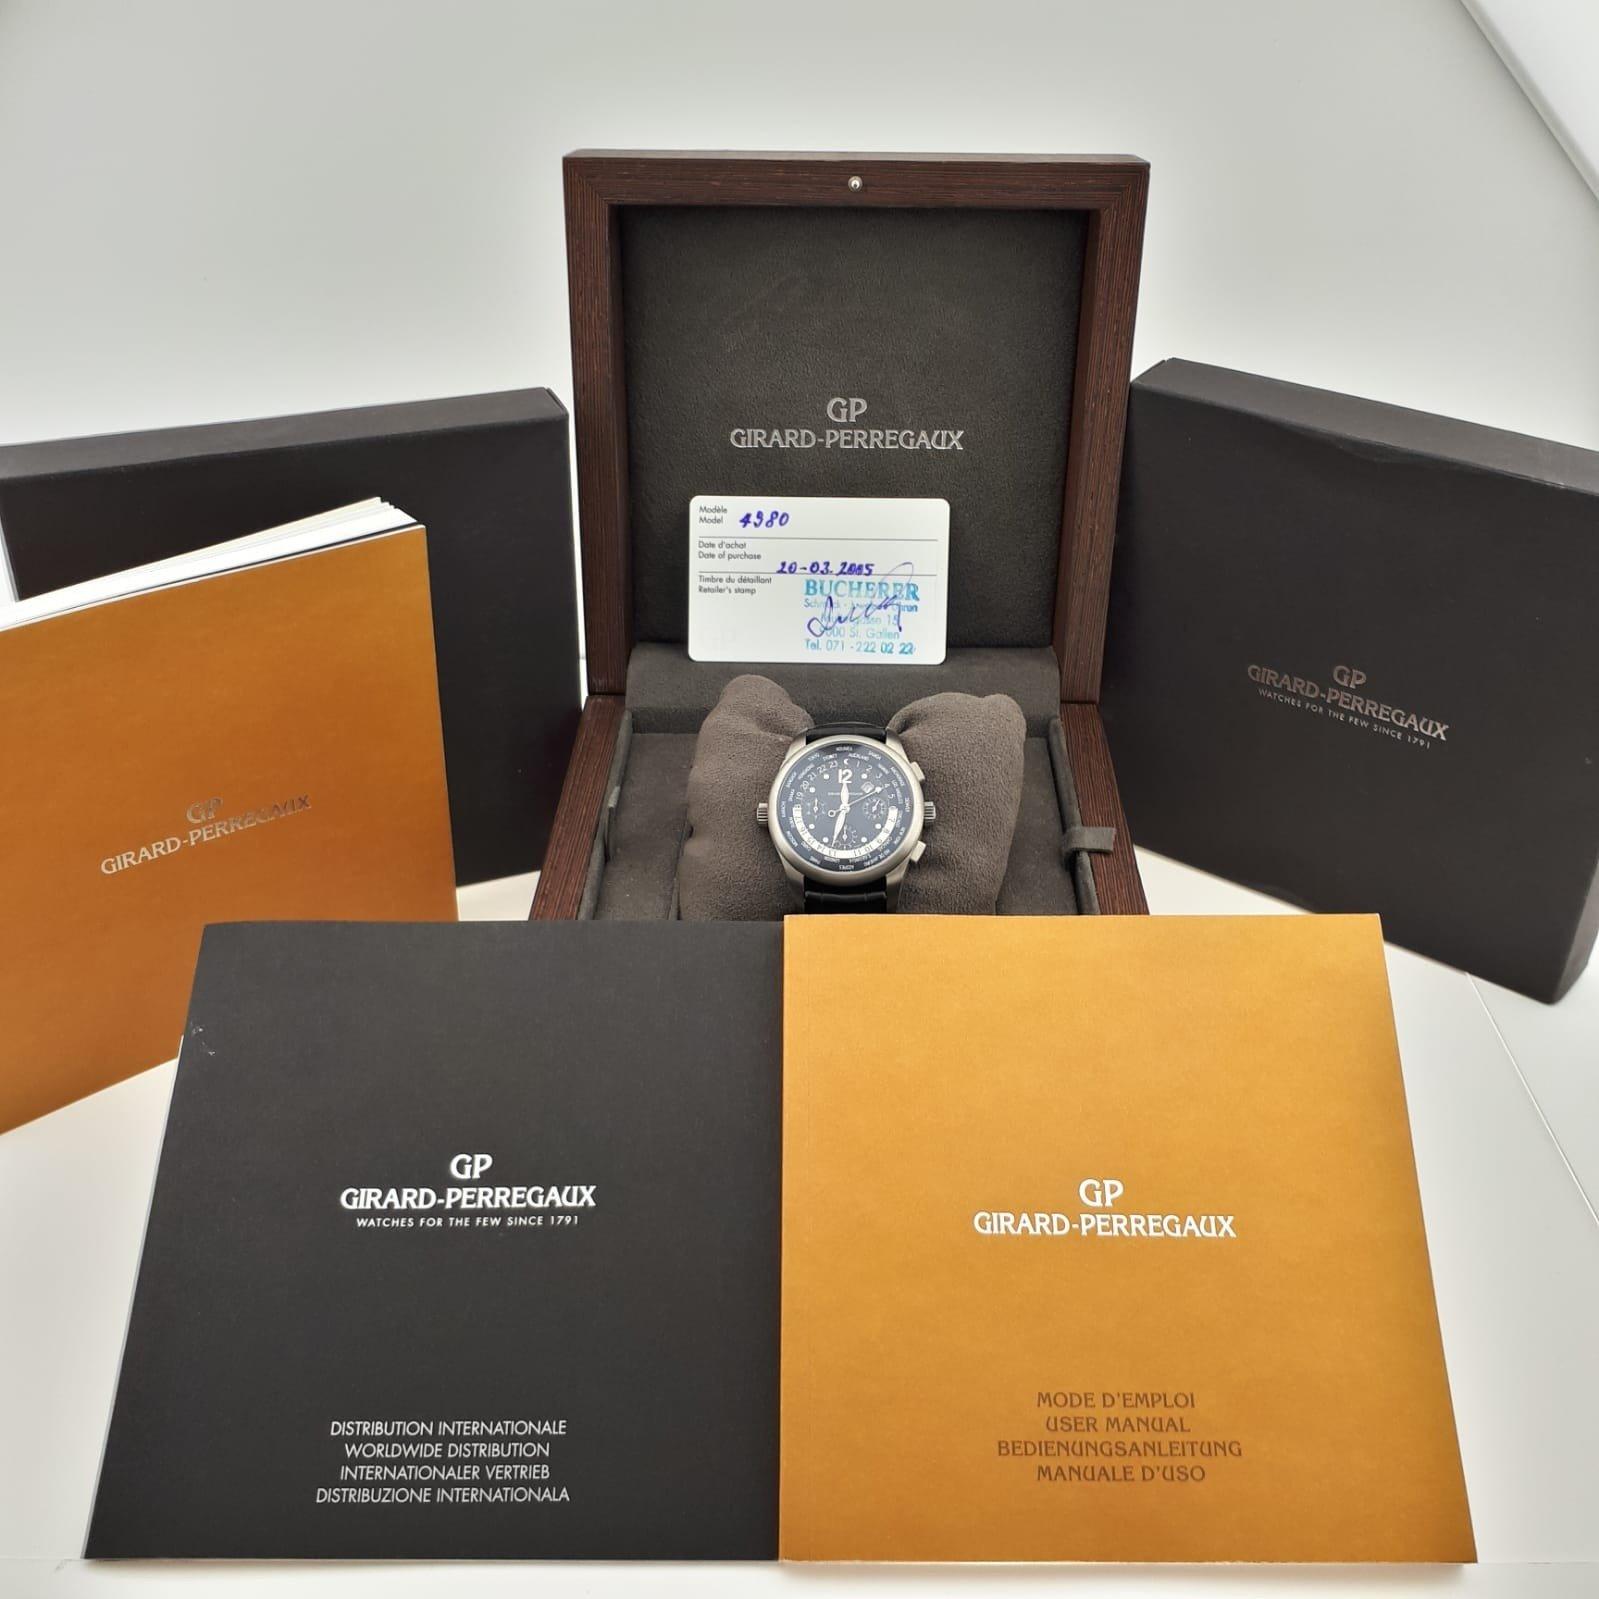 **** Automatic , 43mm, Full Set (Box + Warranty Card + User manuals),
**** Titanium

Brand: Girard Perregaux (Guaranteed Authentic)
Model: World Time WW.TC
Reference Number: 4980
Gender: Men's
Metal: Titanium
Case Size: 43mm excluding winding